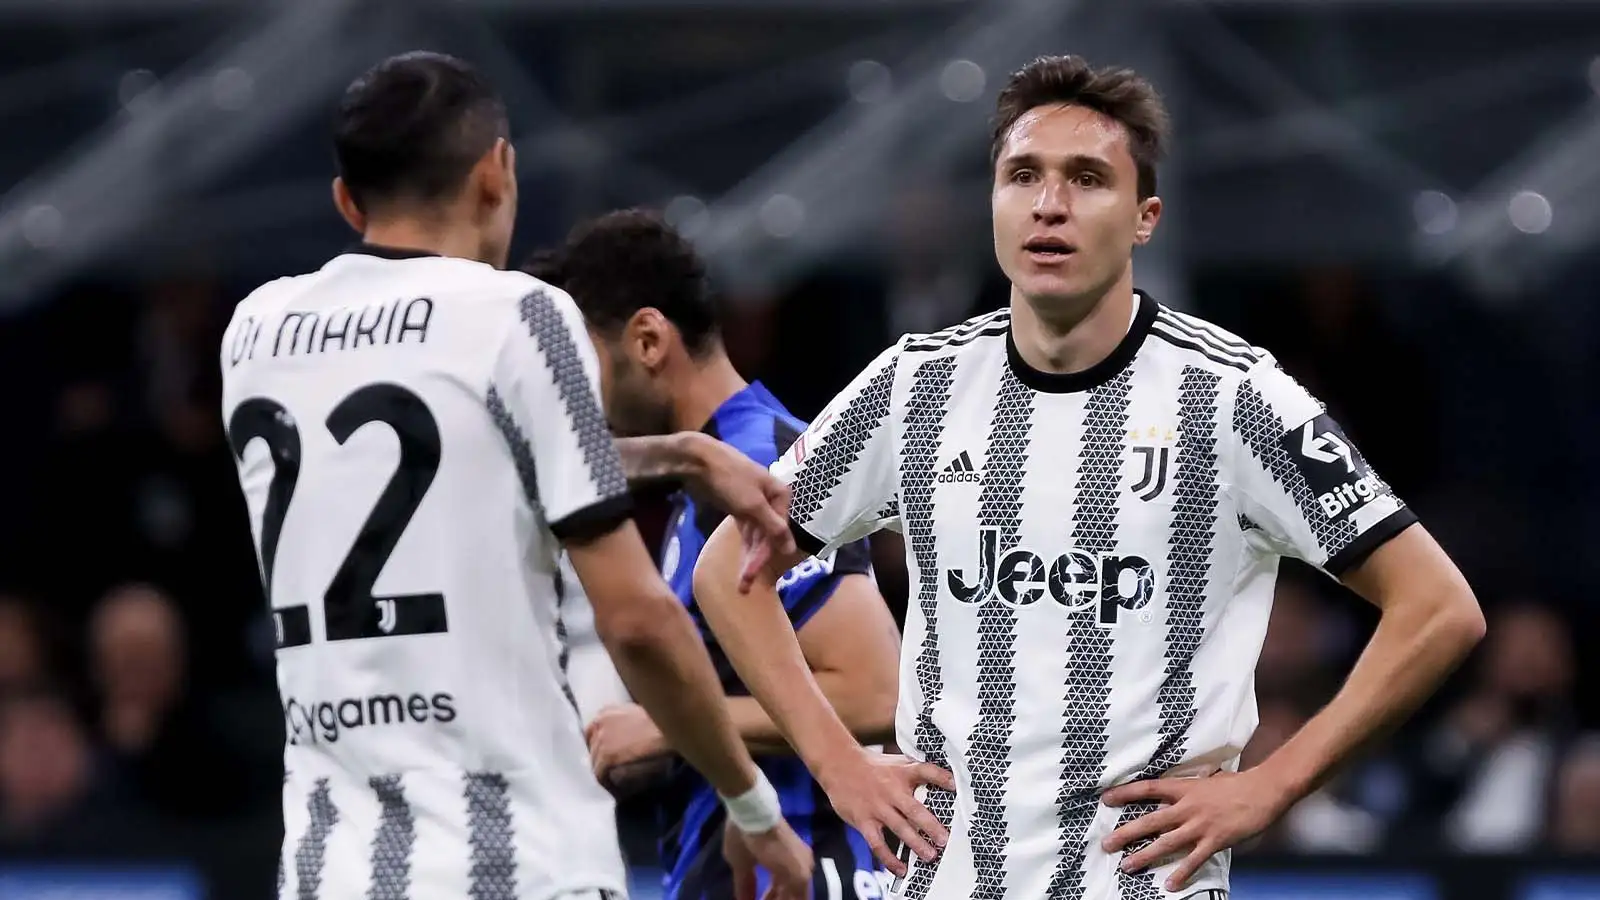 Federico Chiesa (7 Juventus) disappointed during the Coppa Italia semifinal second leg match between FC Internazionale and Juventus FC